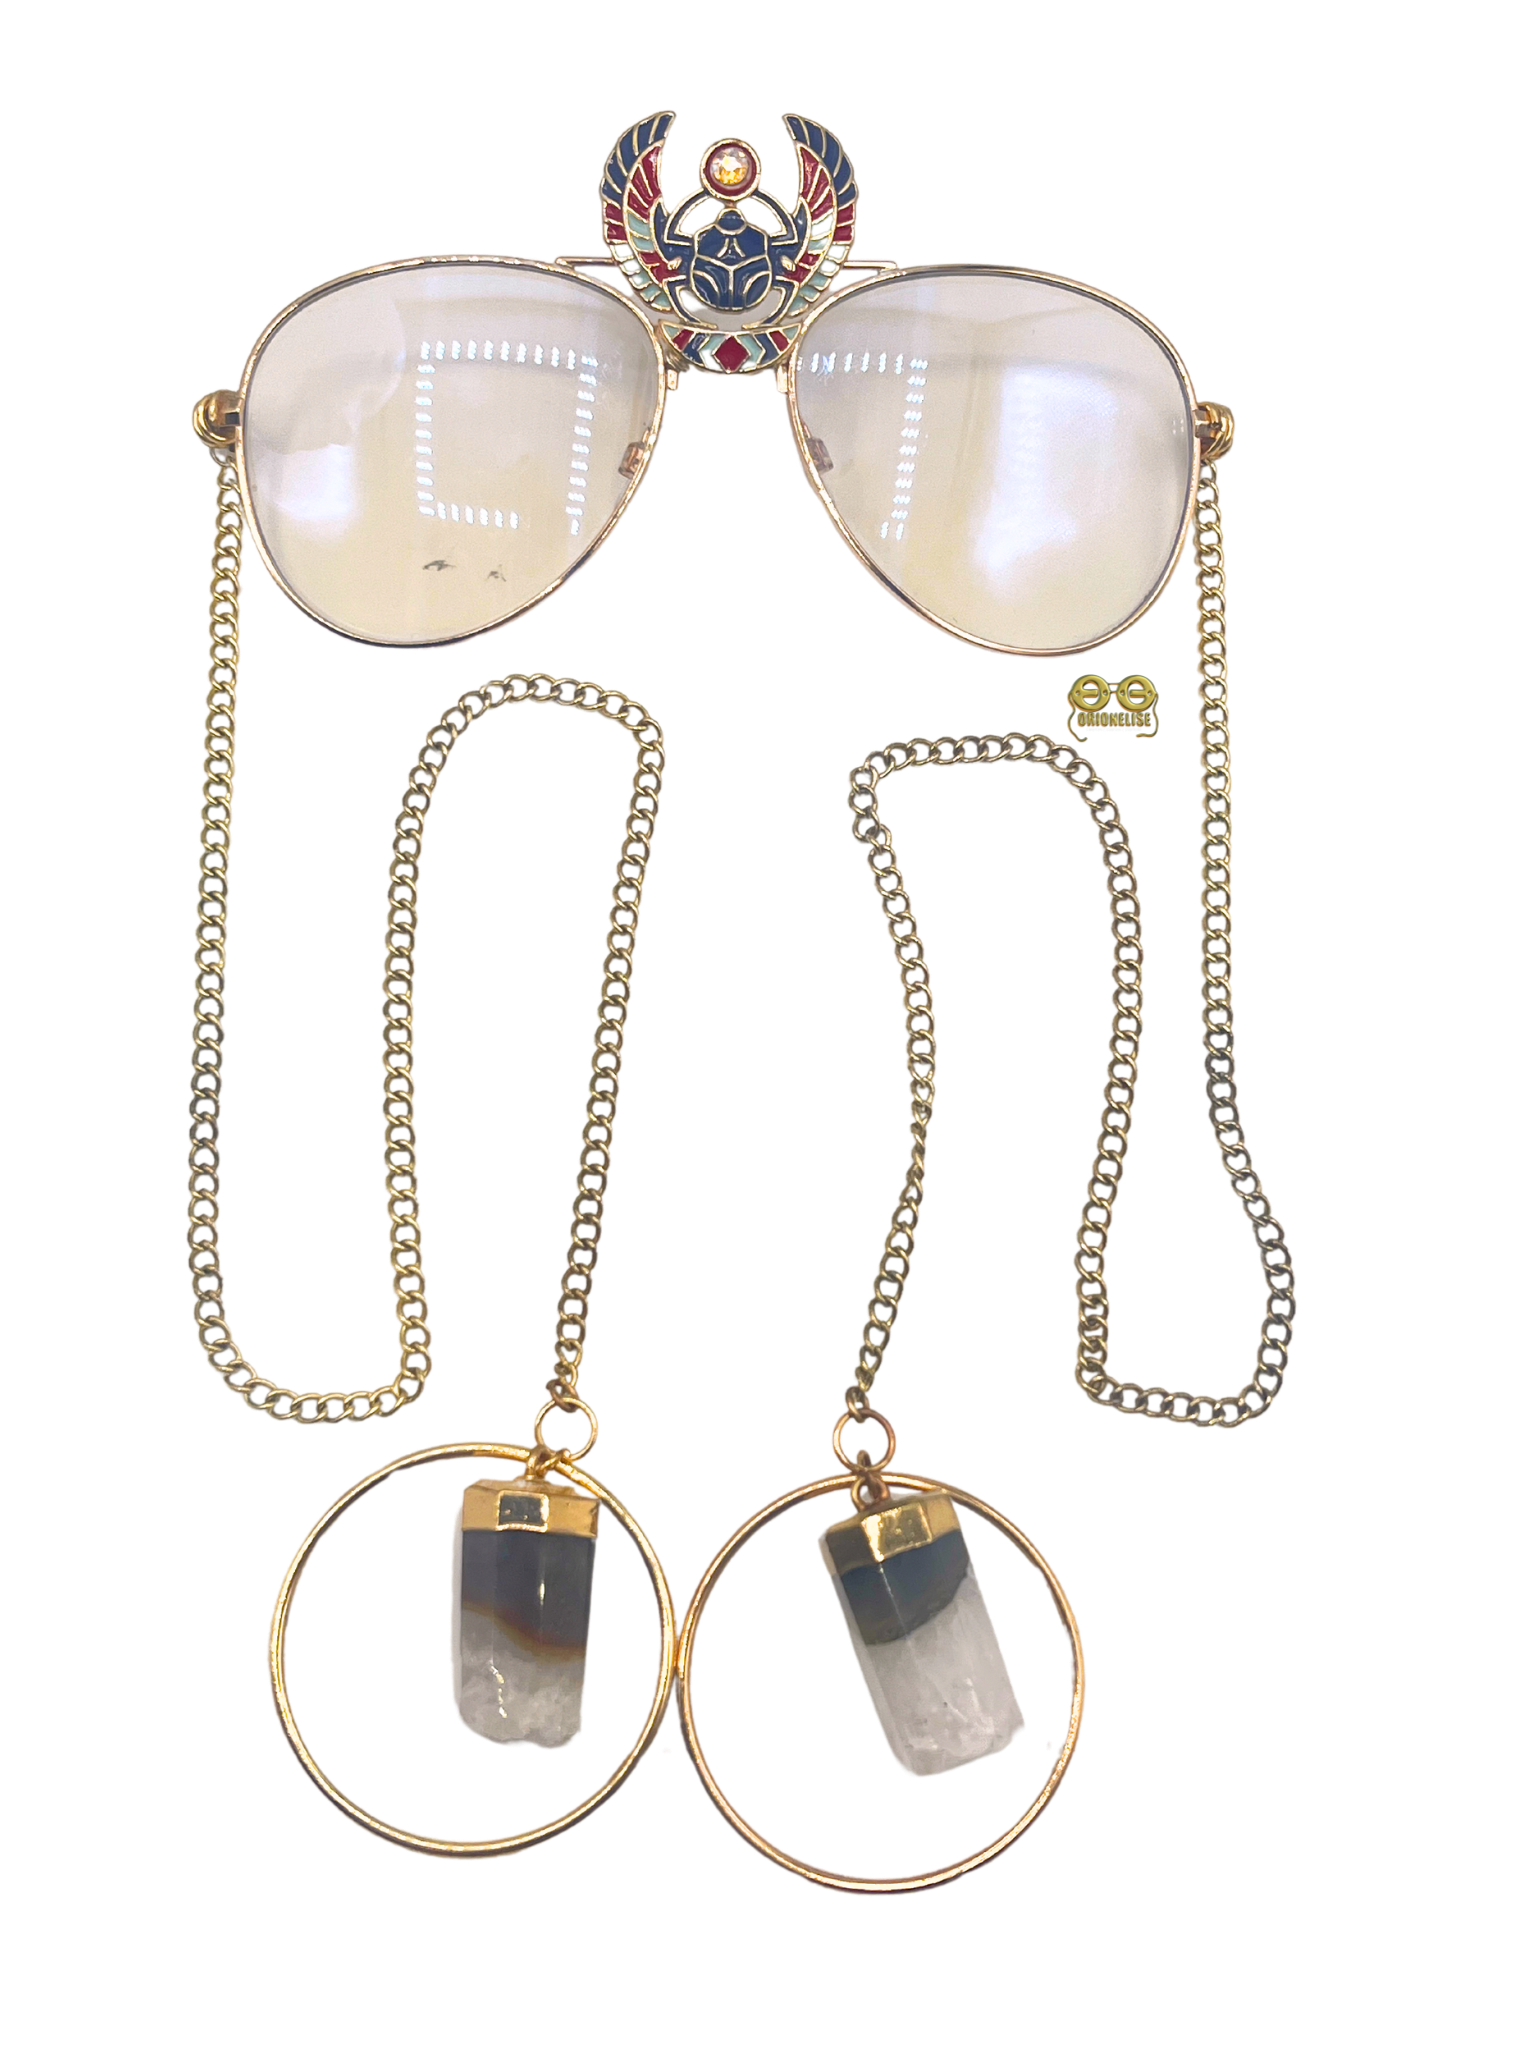 Luxor fashion glasses by Orion Elise. Handcrafted gold-framed glasses with chain arms and scarab design. Genuine quartz stone embellishment adds mystique and allure. Symbol of power, confidence, and individuality. Perfect for red carpet events, high-profile gatherings, or casual nights out. An Erykah Badu vibe for certain. Join the ranks of style icons and express your individuality with Luxor.